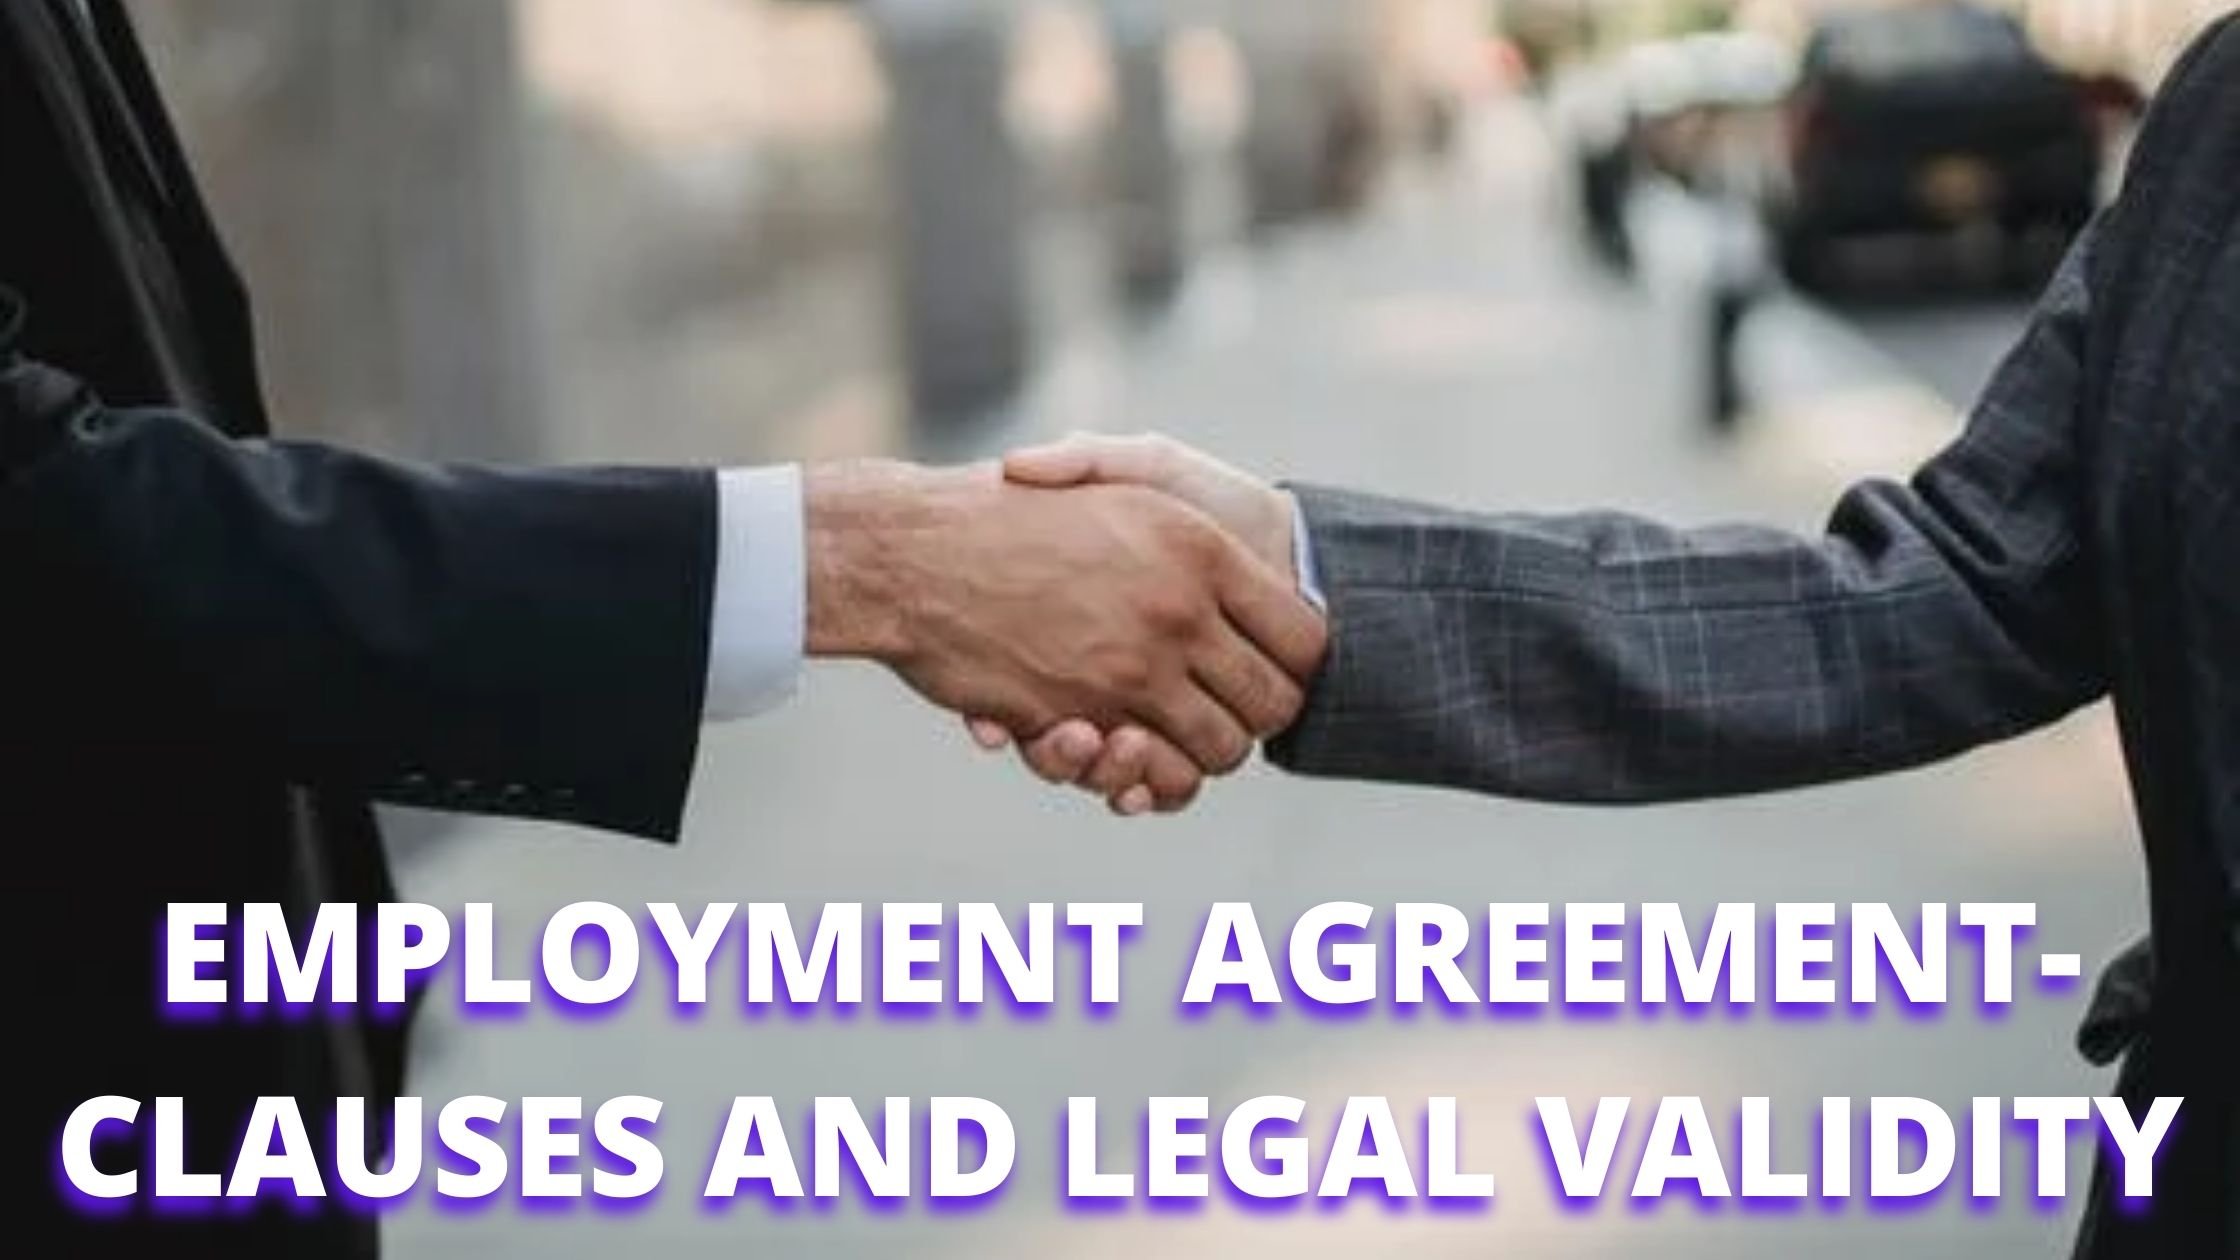 EMPLOYMENT AGREEMENT- CLAUSES AND LEGAL VALIDITY